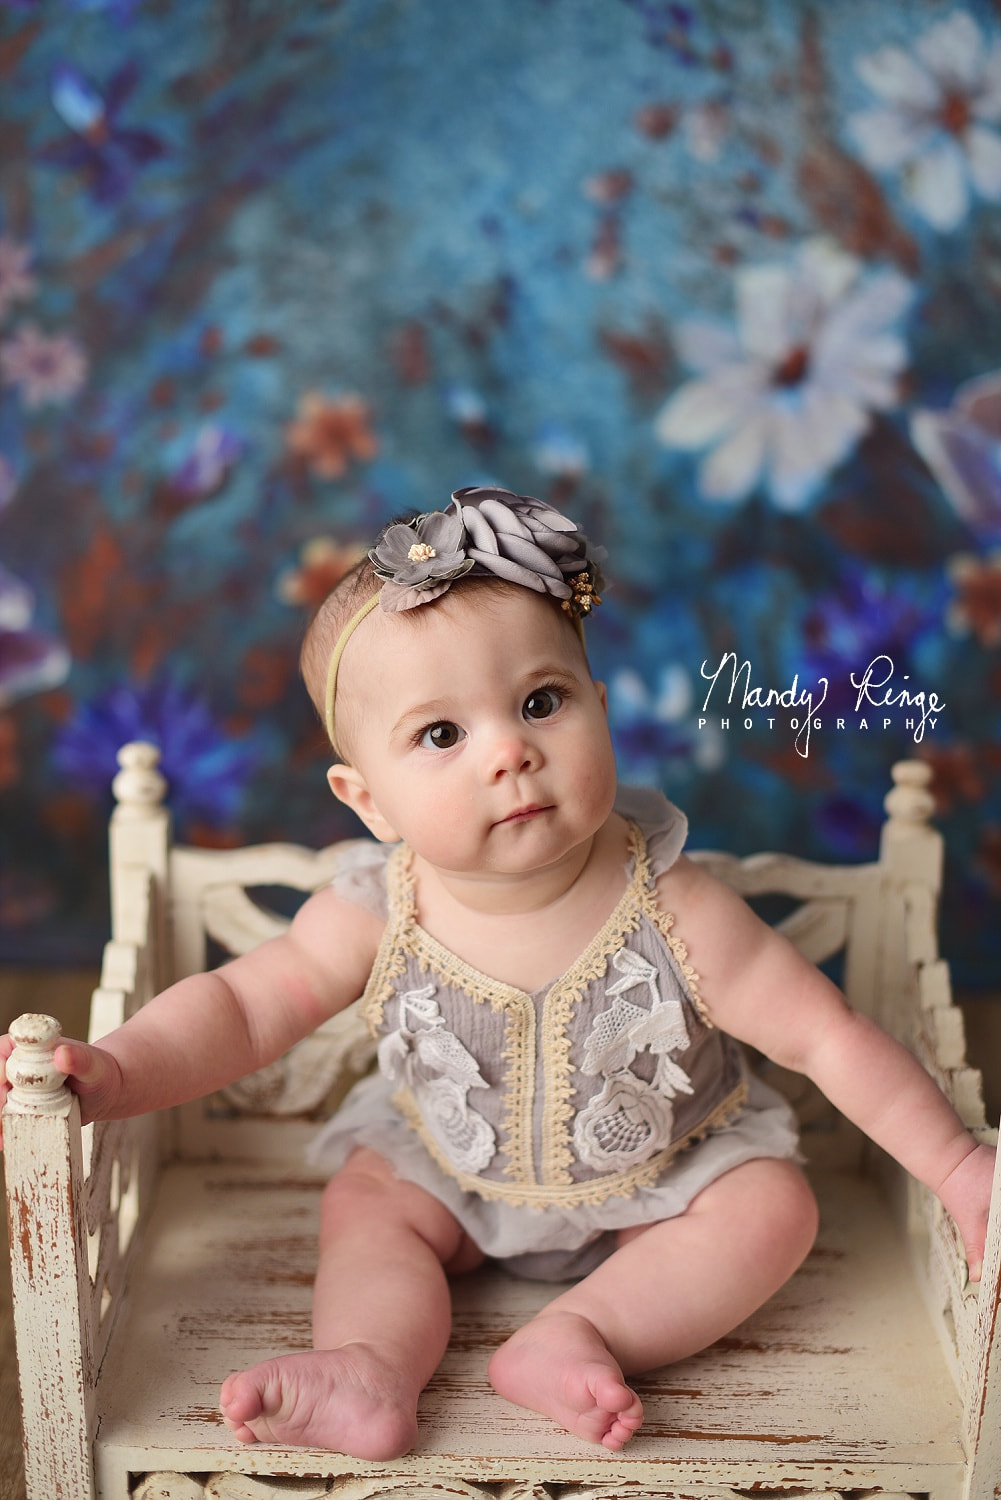 6 month milestone session // baby girl, blue floral backdrop, Cora & Violet Anwen outfit // Sycamore, IL studio photographer // Mandy Ringe Photography